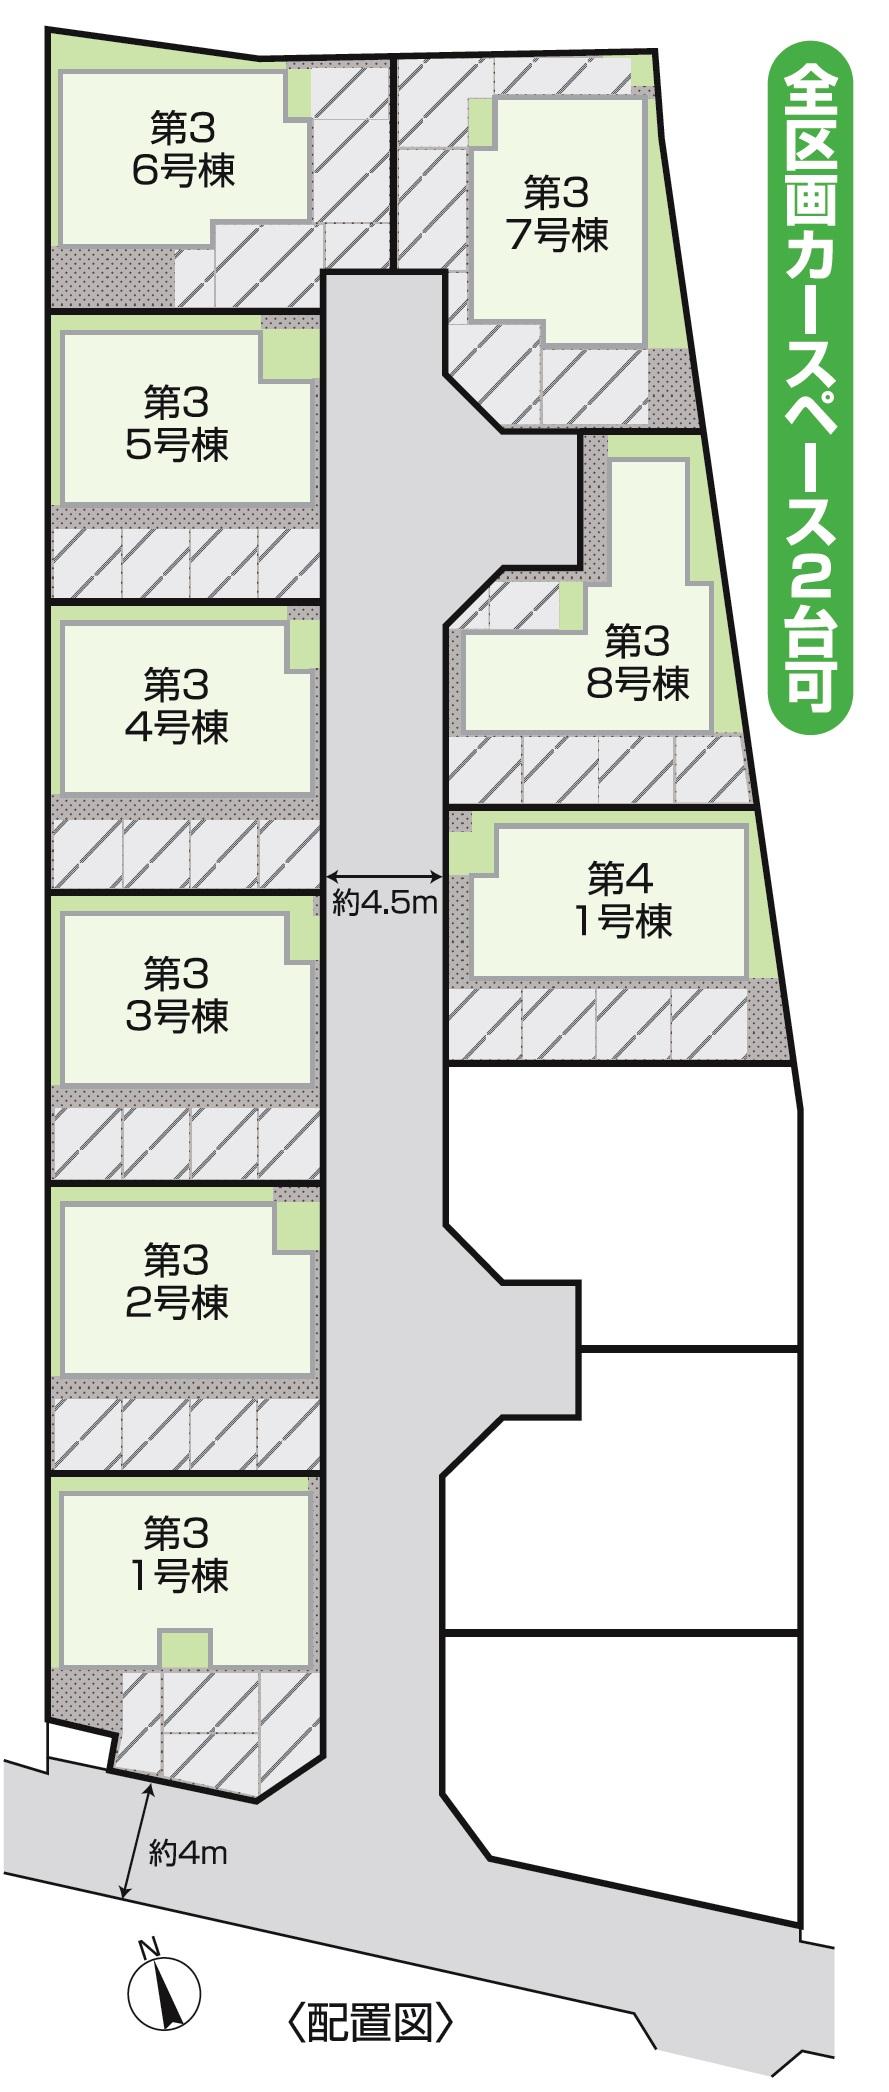 The entire compartment Figure. New construction condominium Atsugi hot water third all 8 buildings Fourth all 1 buildings sale